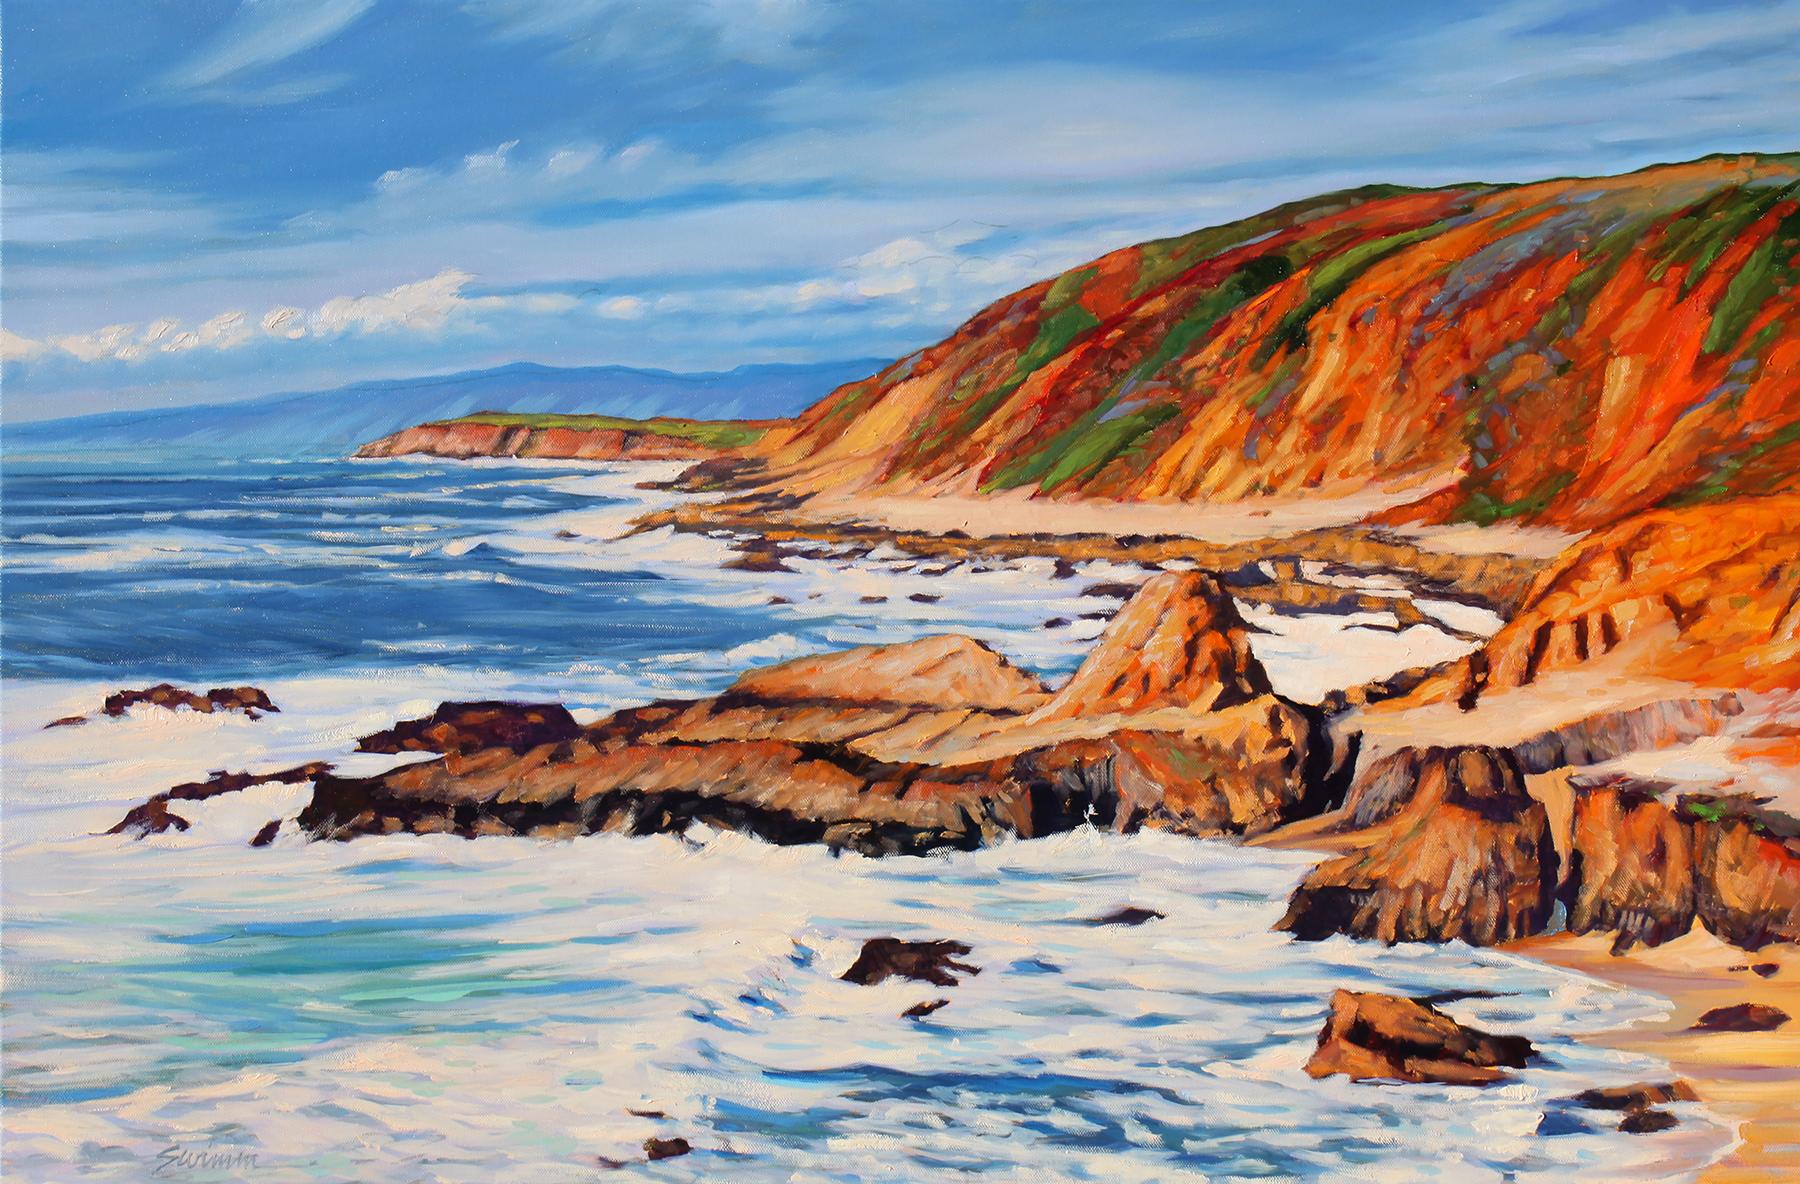 Tom Swimm Landscape Painting -  "Clouds & Surf" With Colorful Water Reflections Oil Painting